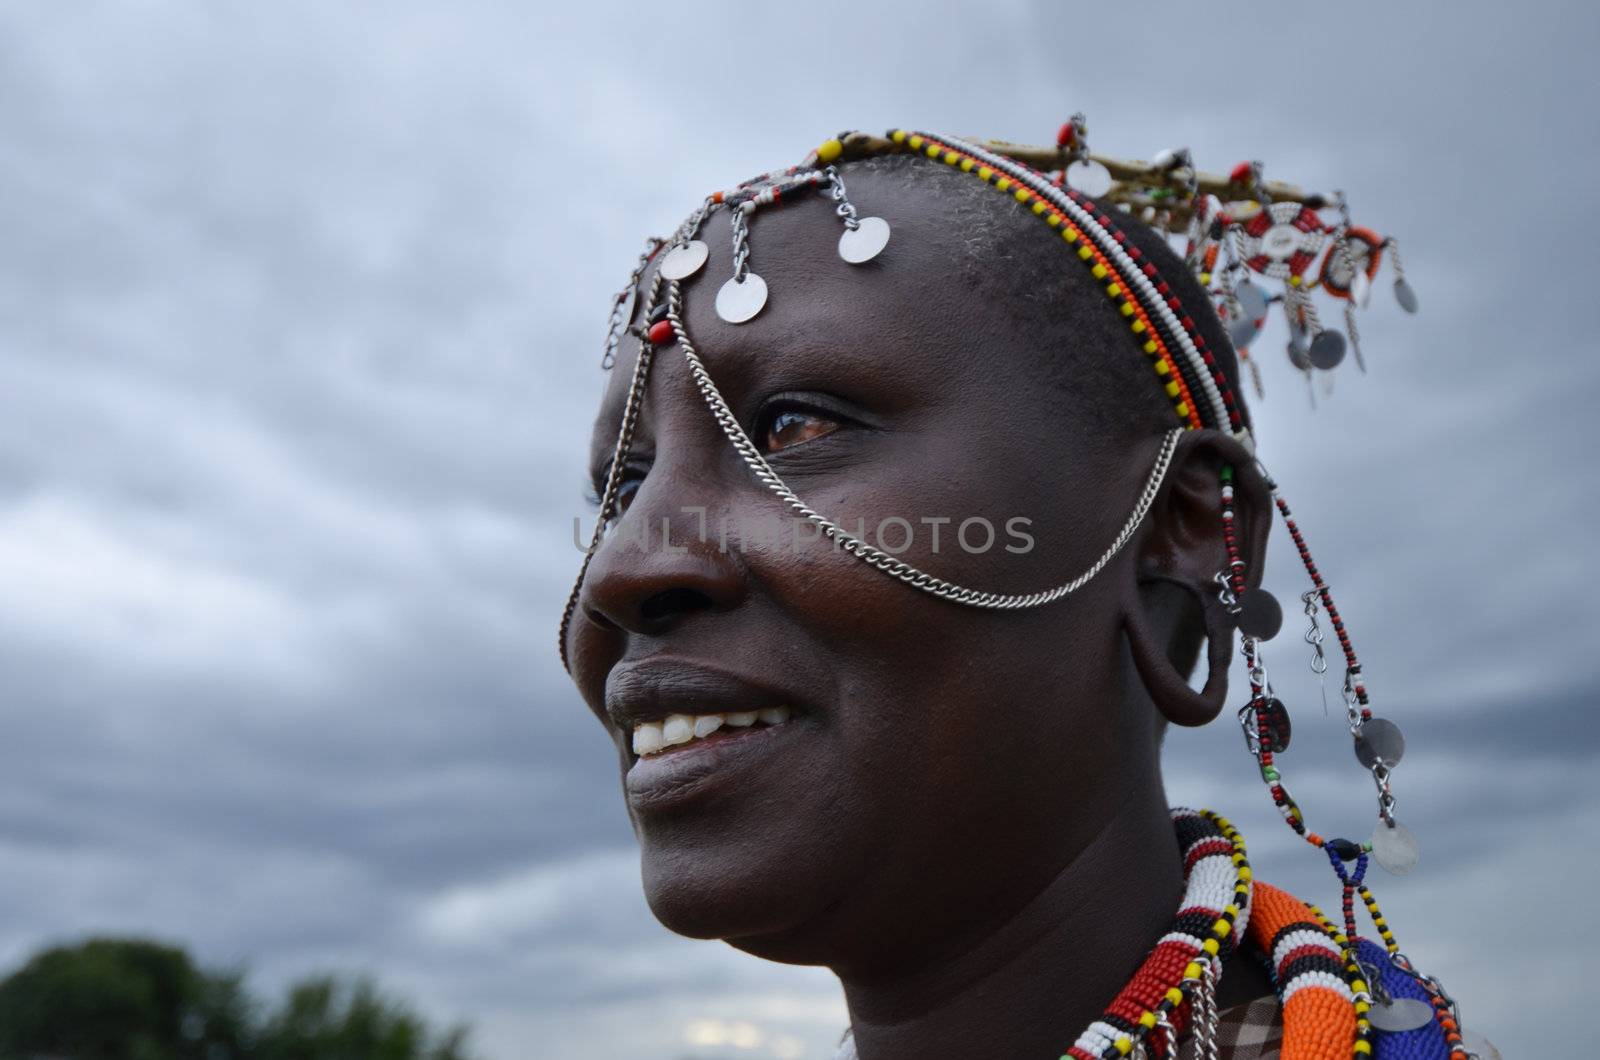 Village  Masai Mara, Kenya – October  17, 2011: Masai woman is seen in his ceremonial dress. He is meeting visitors to his village where he demonstrates traditional culture. She is located in the southwestern region of the Masai Mara in Kenya.